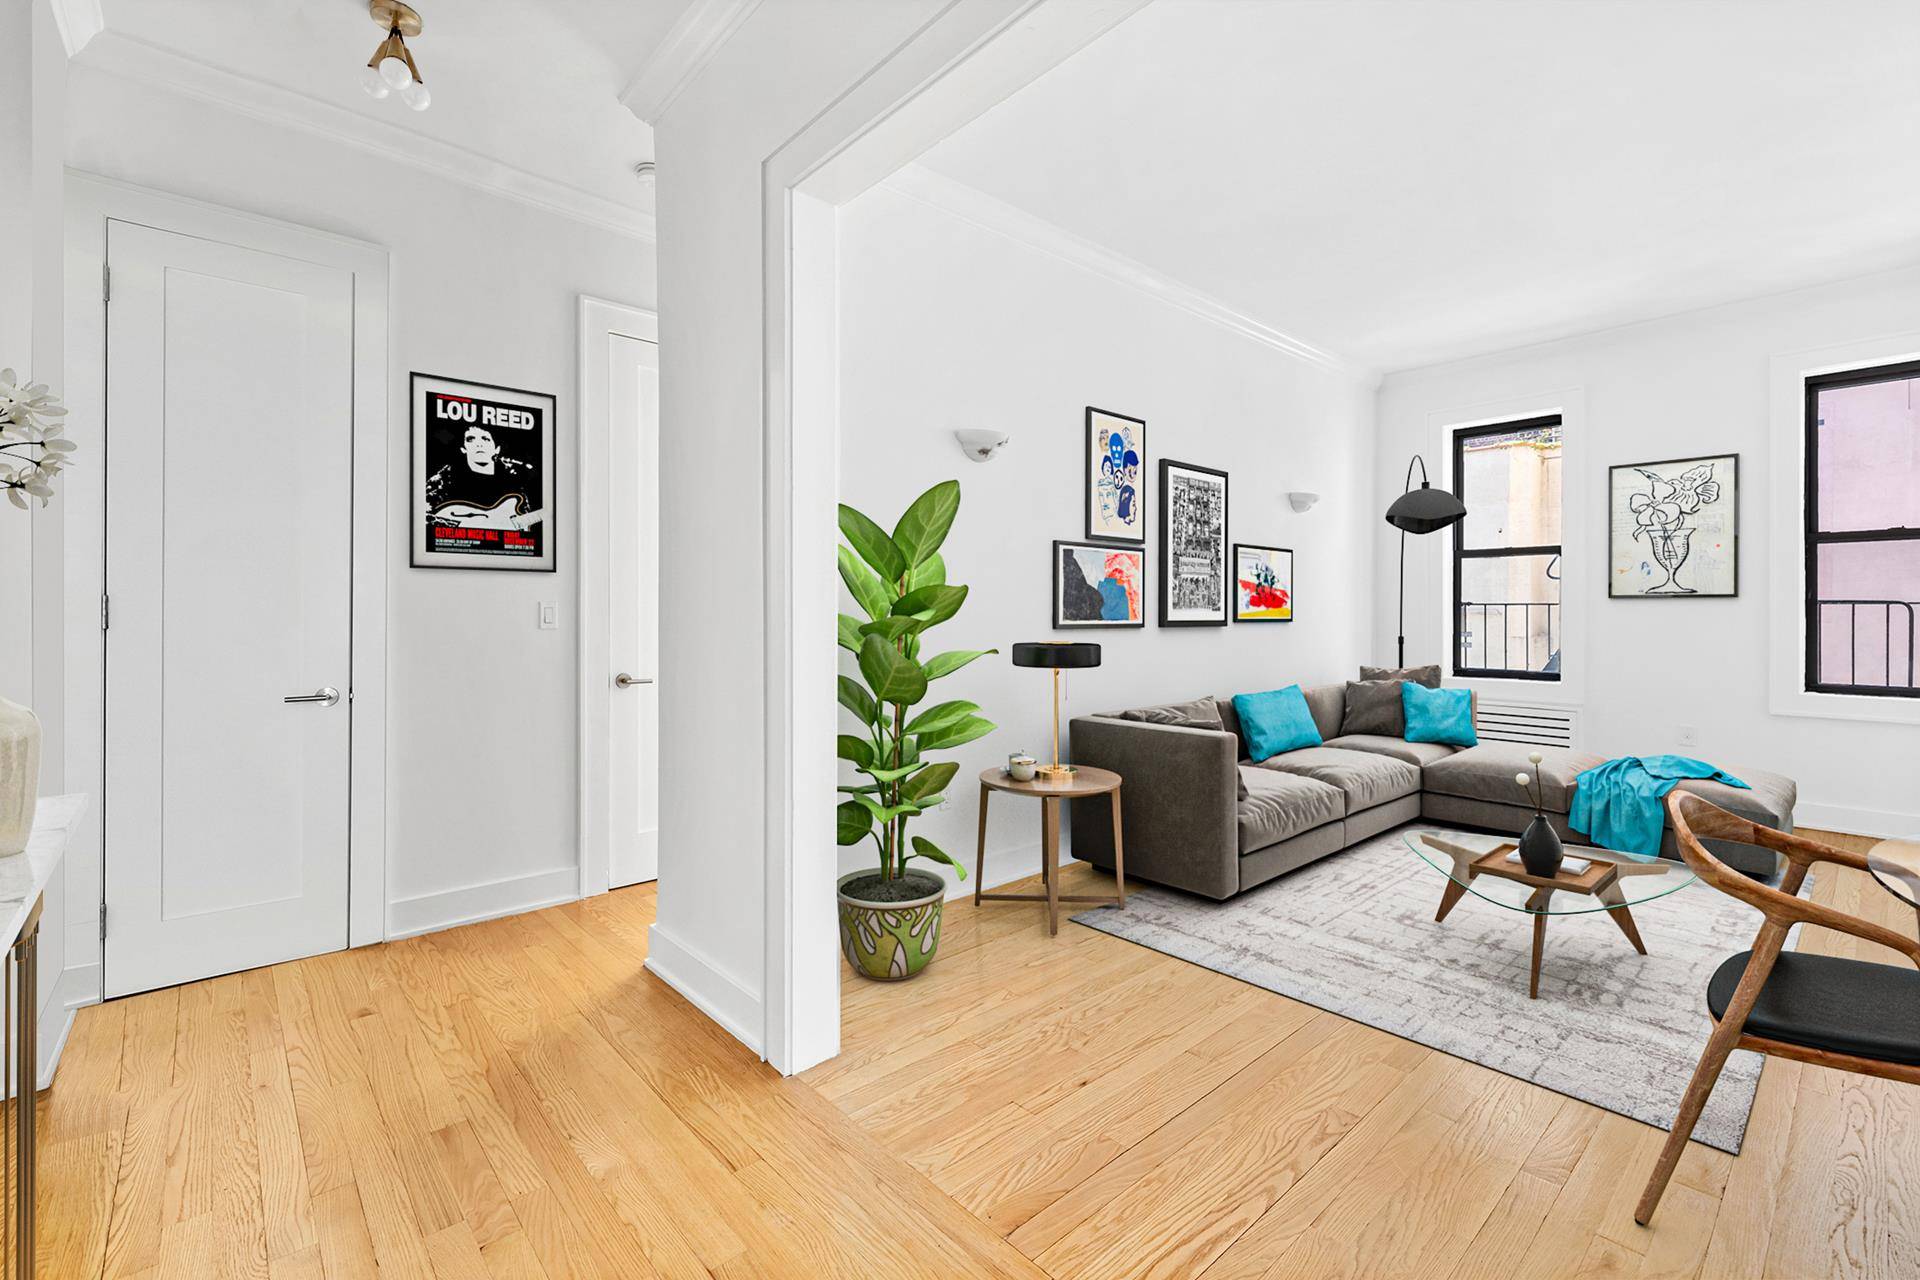 Gorgeously renovated, pin drop quiet and located in one of the most charming, pre war elevator buildings downtown has to offer.